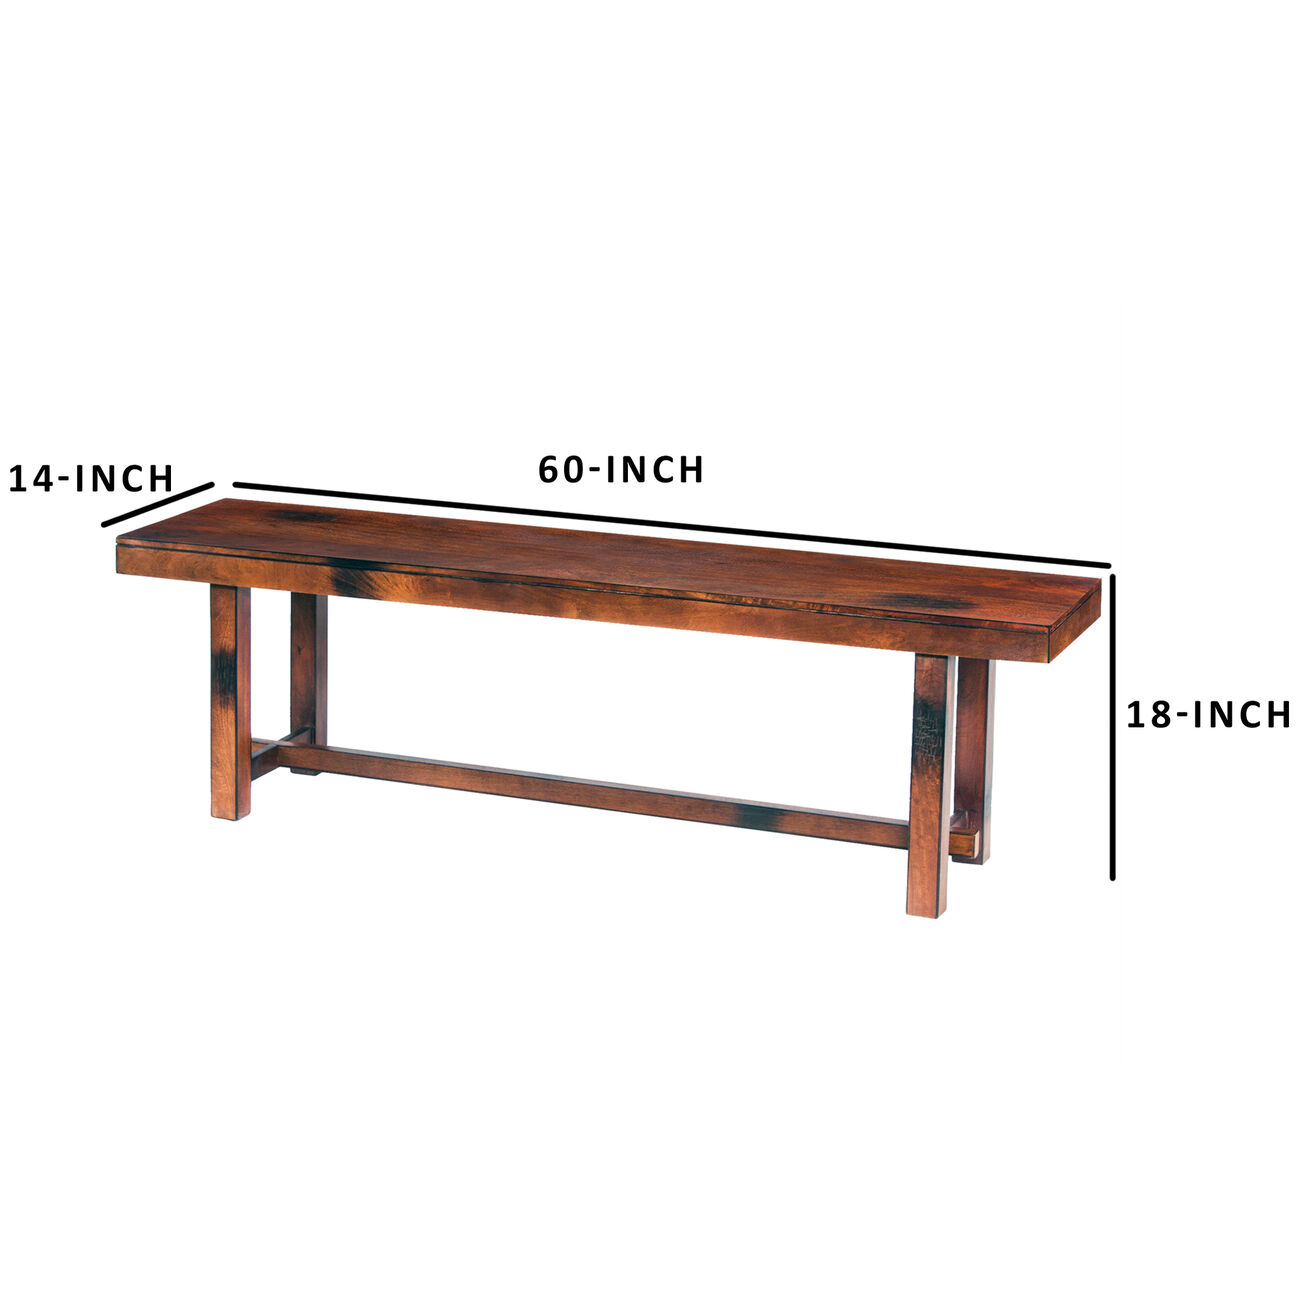 Transitional Style Mango Wood Bench with Block Leg Support, Dark Brown